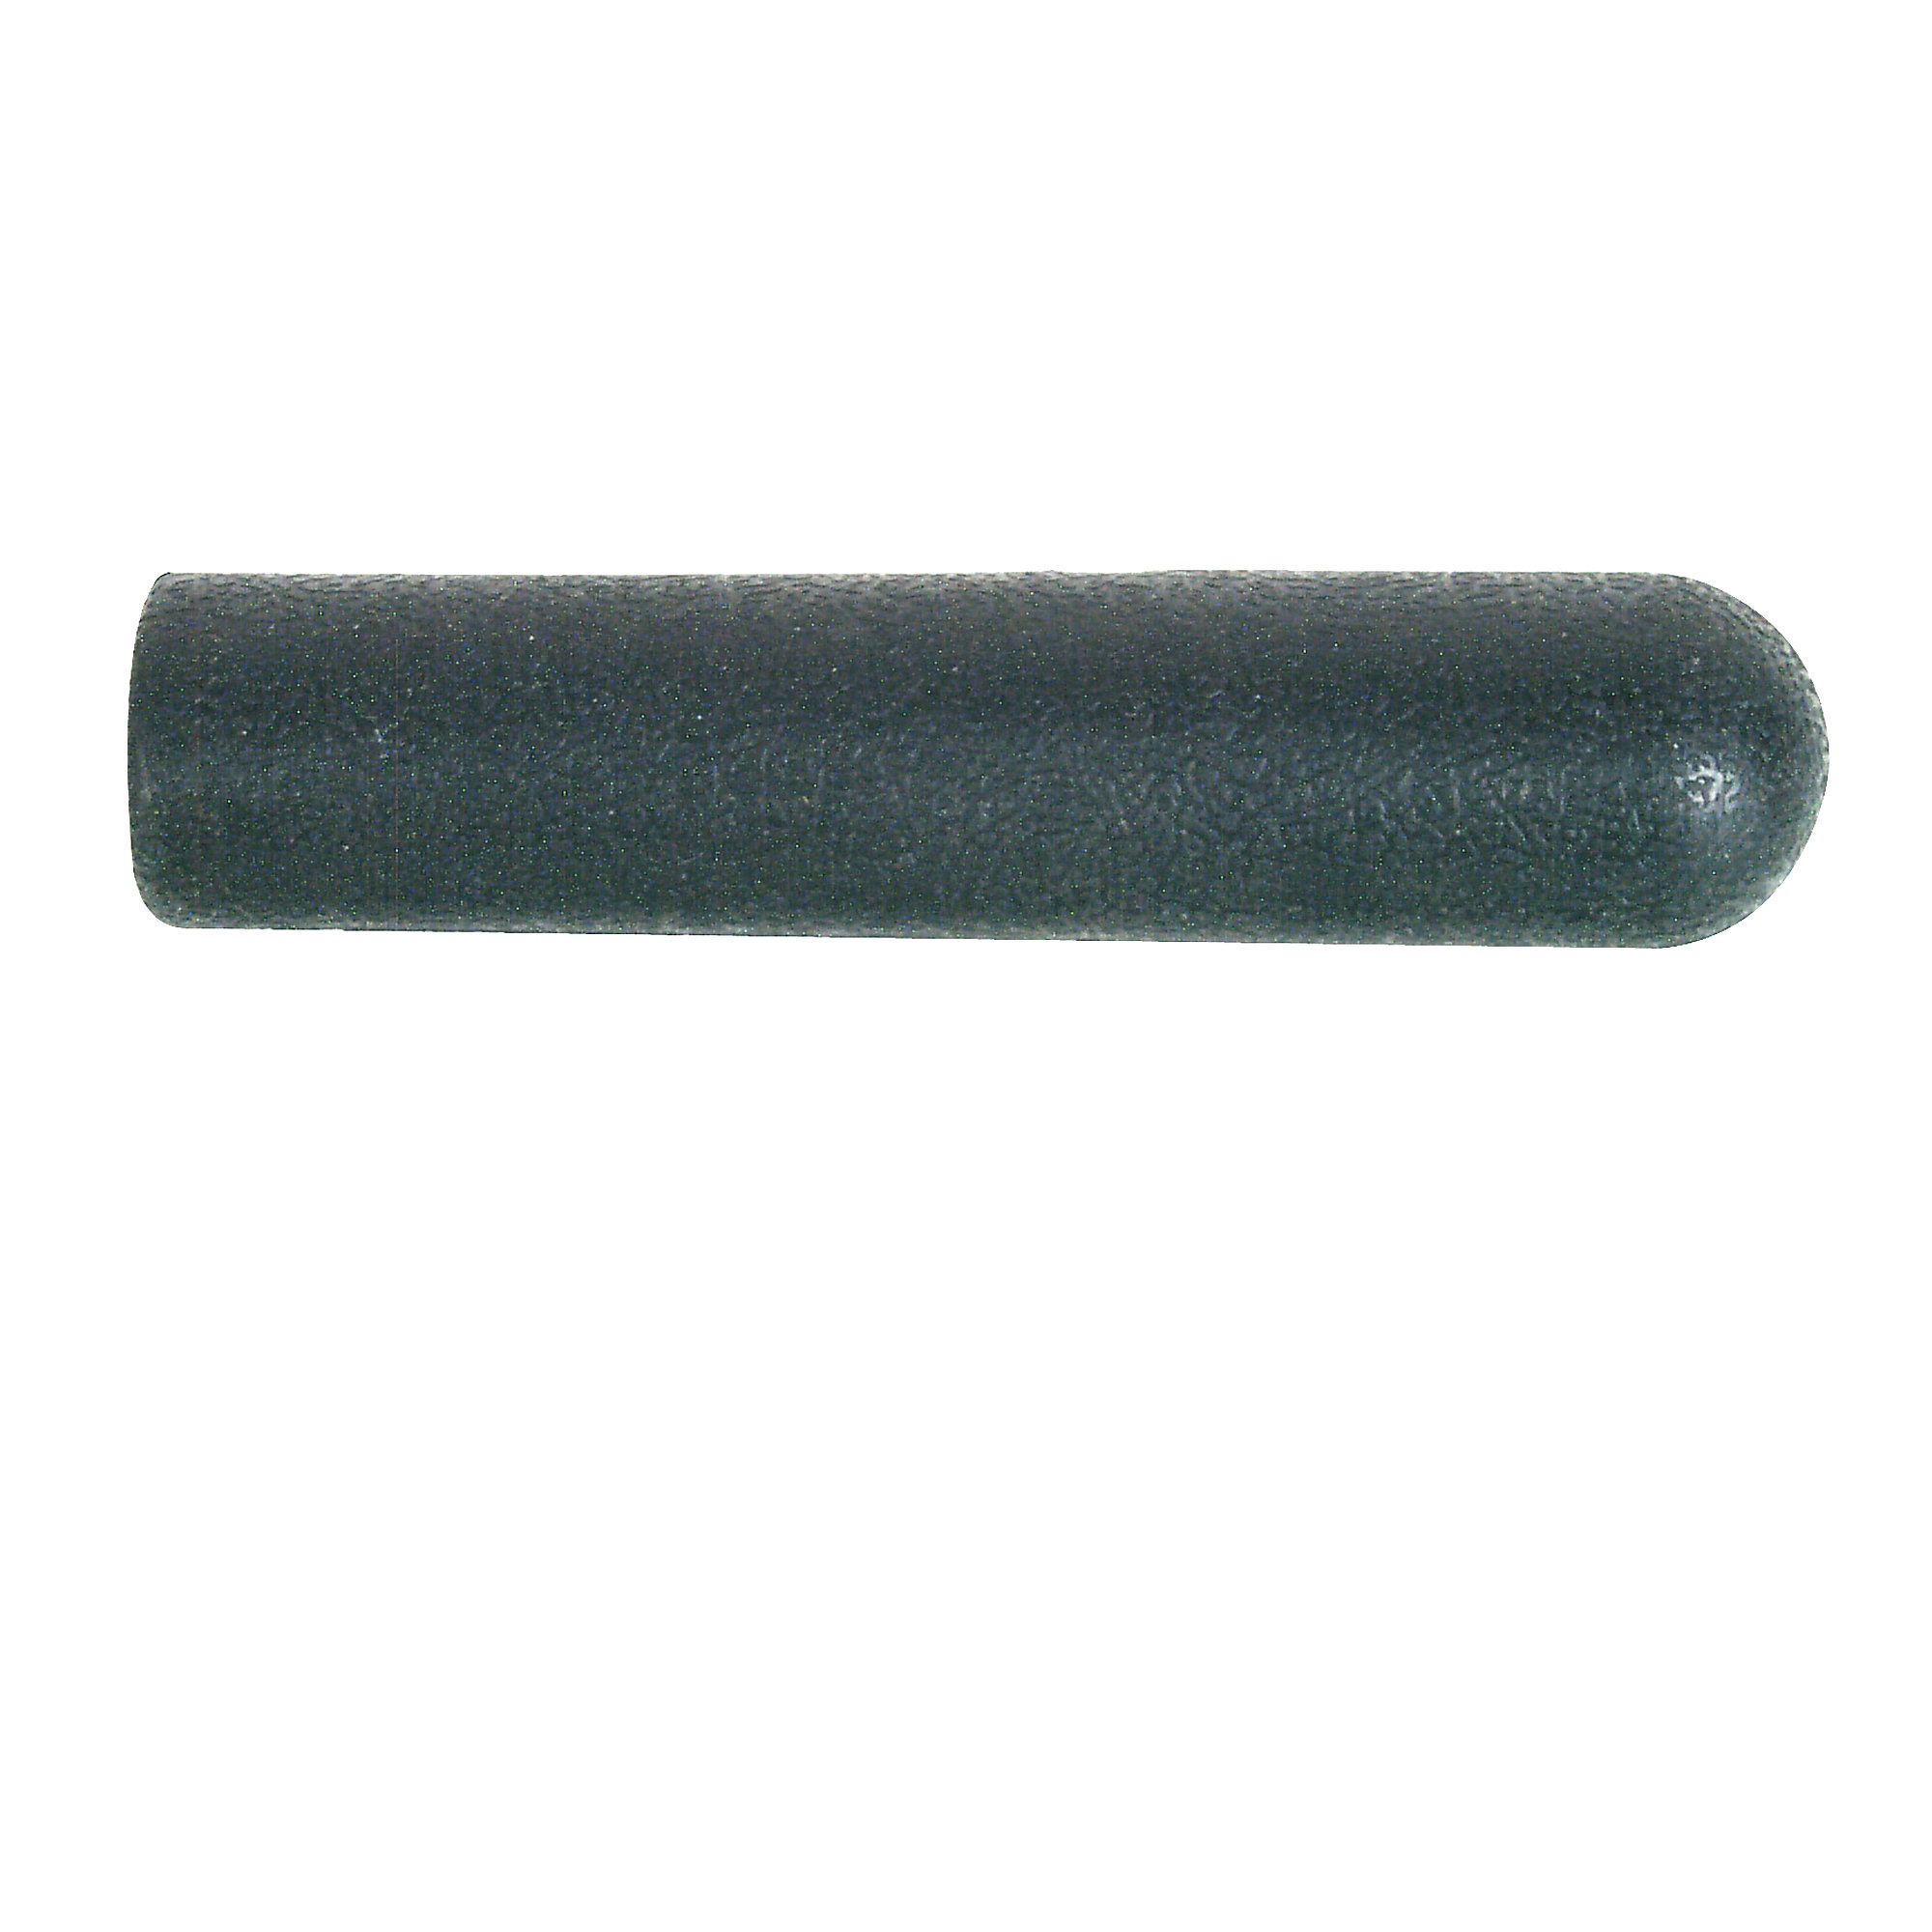 Closed End Hard Rubber Grip, 5" Long, Fits 1", Each